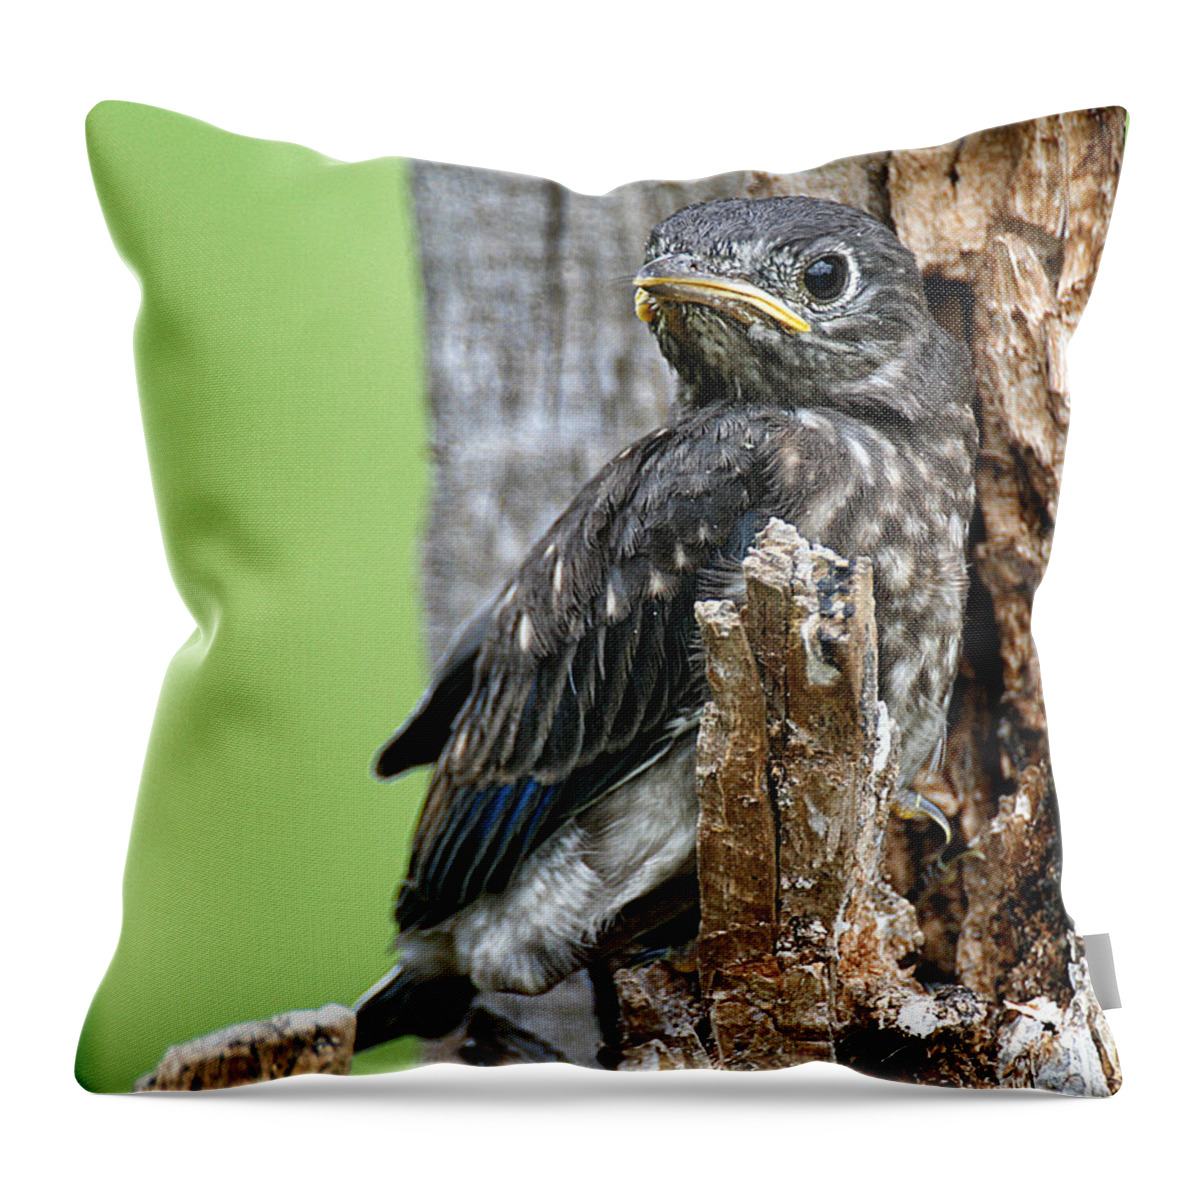 Animal Throw Pillow featuring the photograph Baby Bluebird by William Selander